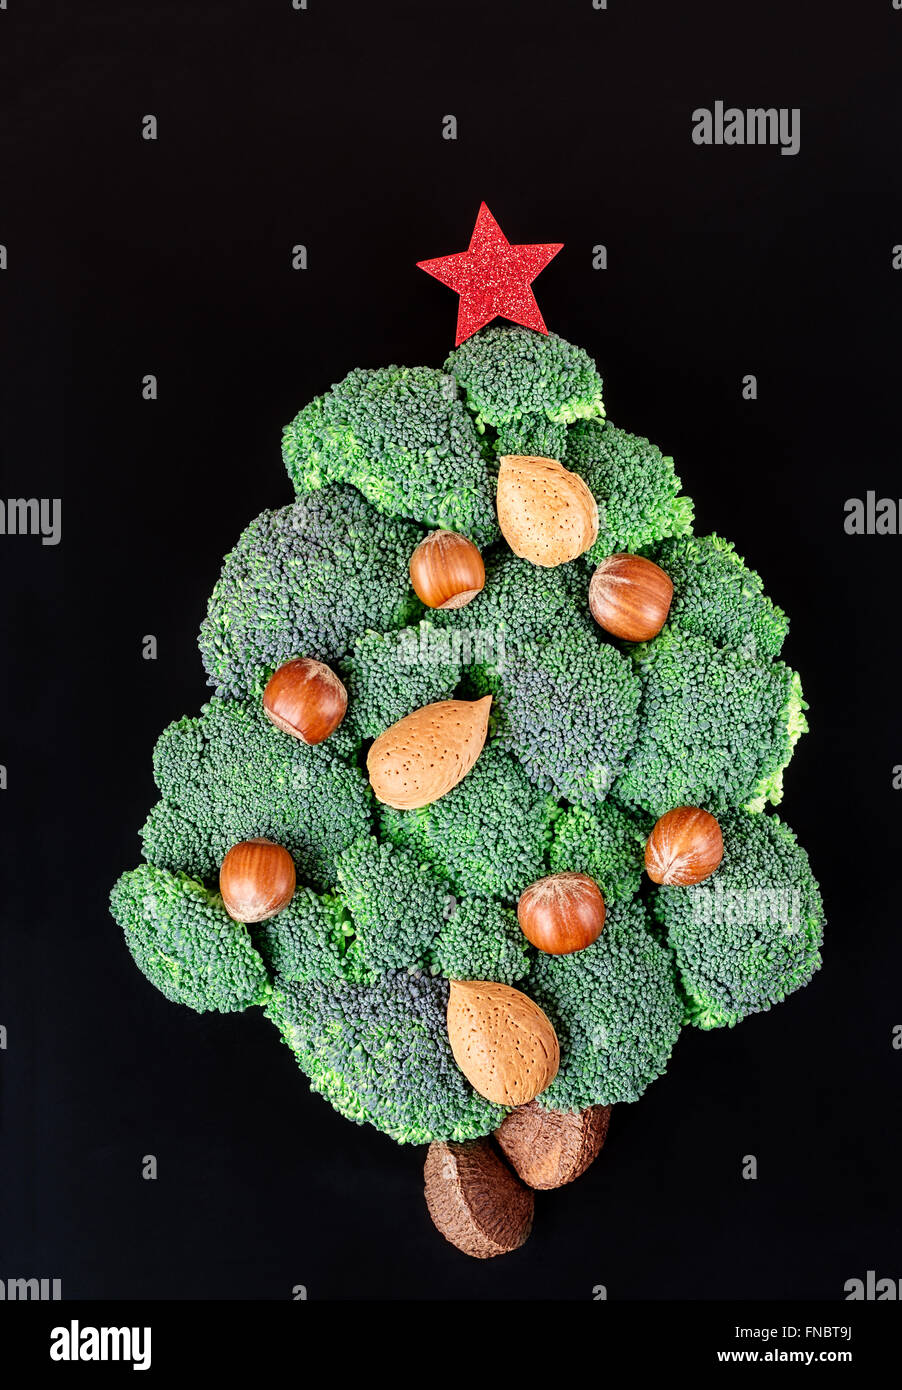 Christmas tree decoration made of broccoli flowerheads and decorated with nuts. Stock Photo